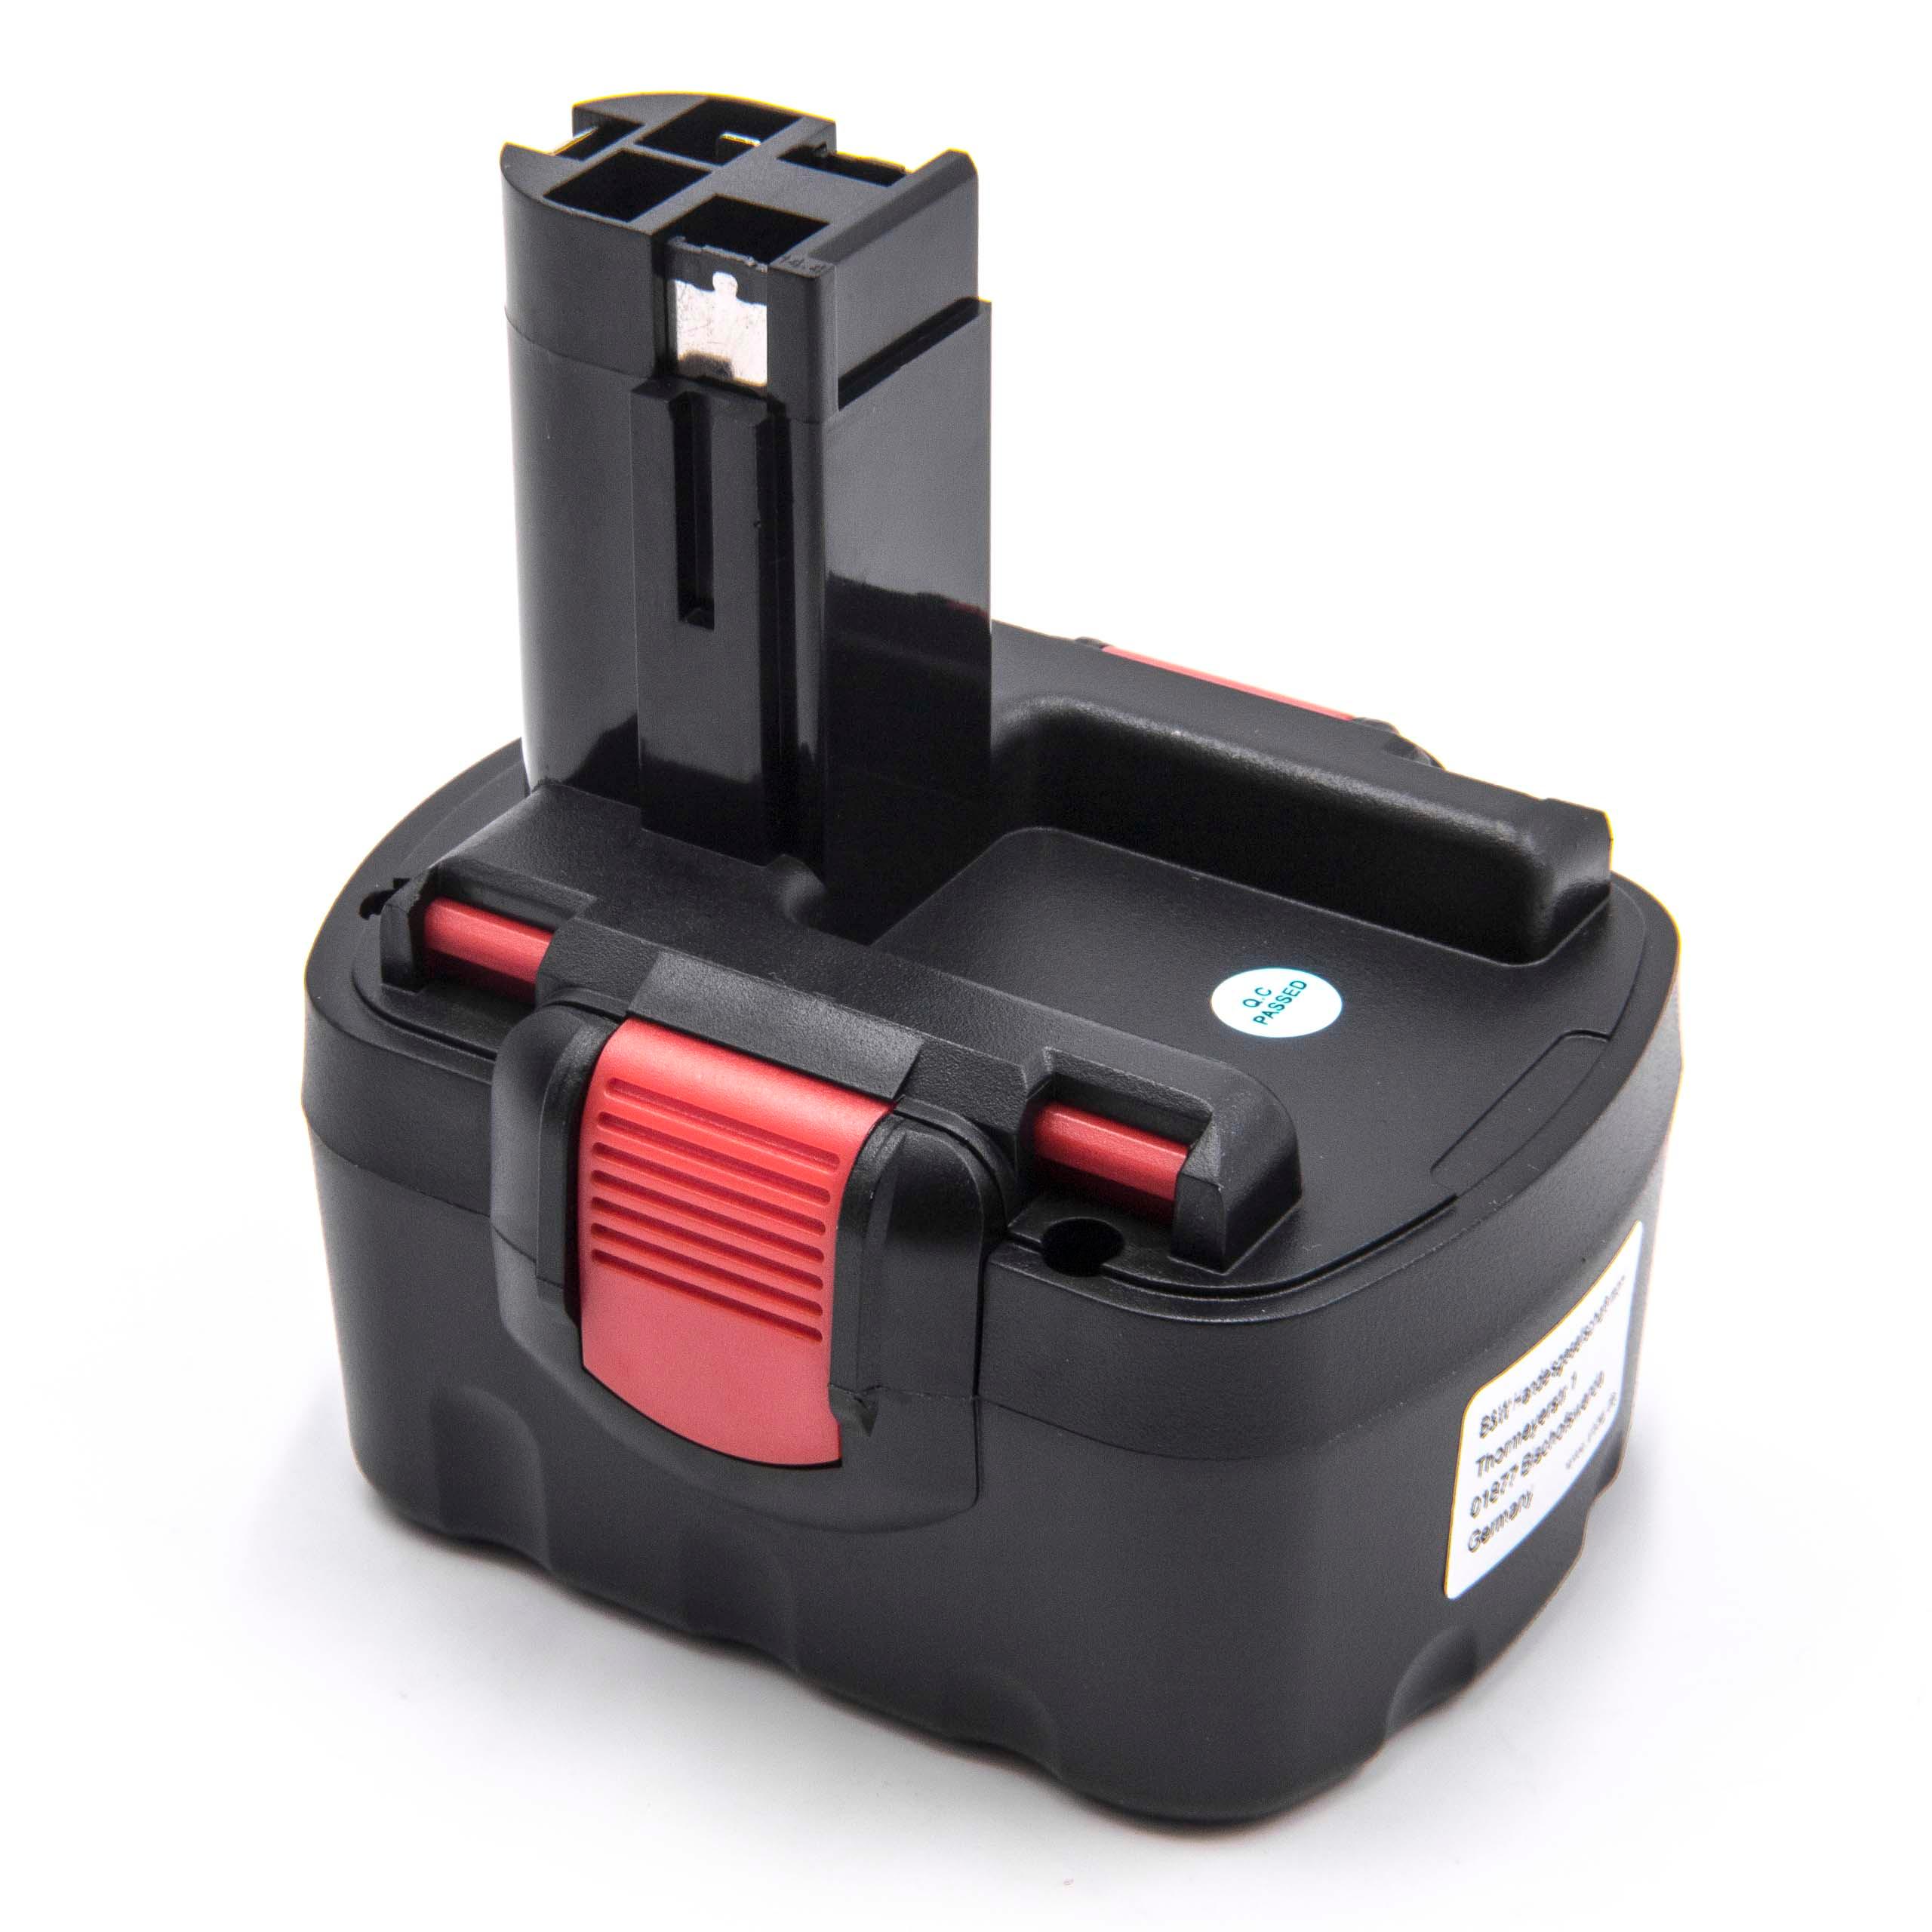 Electric Power Tool Battery Replaces Bosch 2 607 335 264, 2 607 335 263, 1617S0004W - 1500 mAh, 14.4 V, NiMH